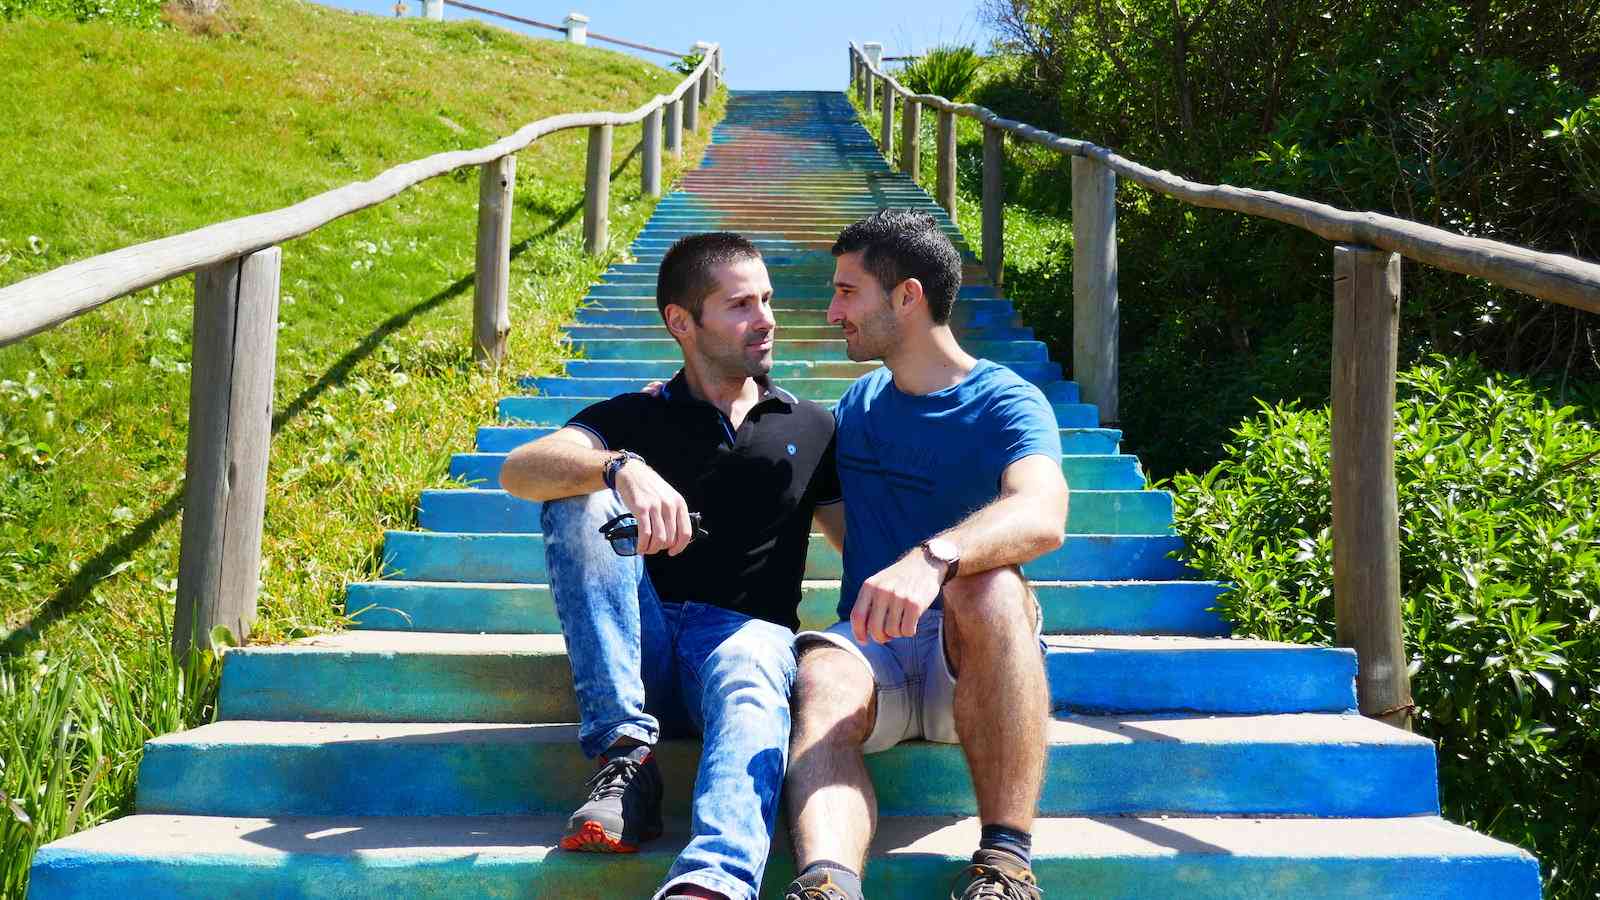 Uruguay has some of the best LGBTQ rights in the world and is a very tolerant country in many ways